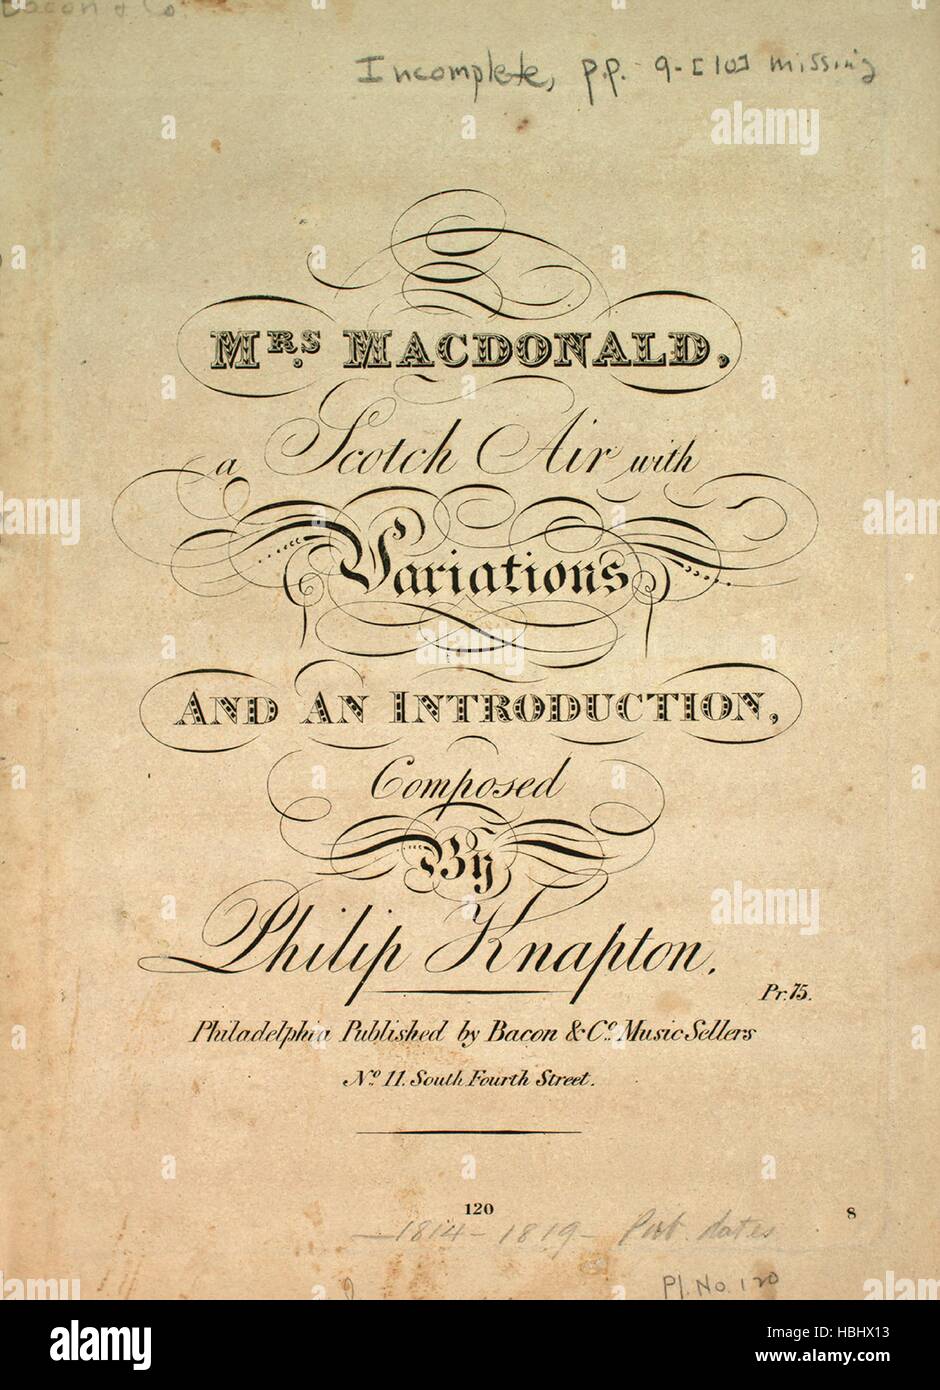 Sheet music cover image of the song 'Mrs Macdonald A Scotch Air with Variations and an Introduction', with original authorship notes reading 'Composed by Philip Knapton', United States, 1900. The publisher is listed as 'Bacon and Co., Music Sellers, No. 11 South Fourth Street', the form of composition is 'theme and variation', the instrumentation is 'piano', the first line reads 'None', and the illustration artist is listed as 'None'. Stock Photo